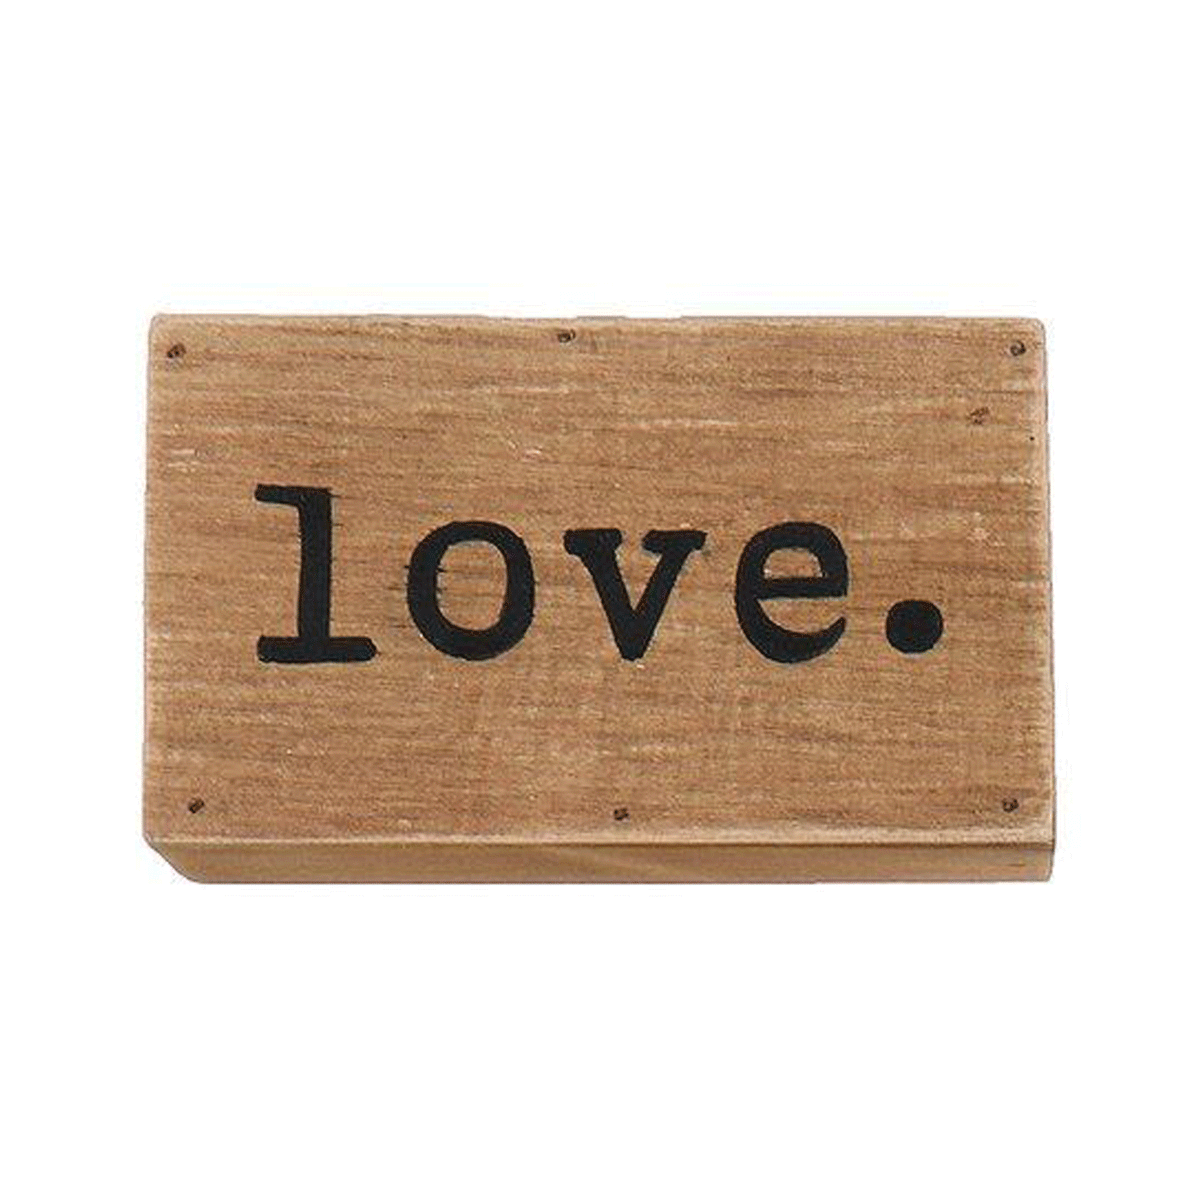 Love. Wood Block Sign - Signs & More